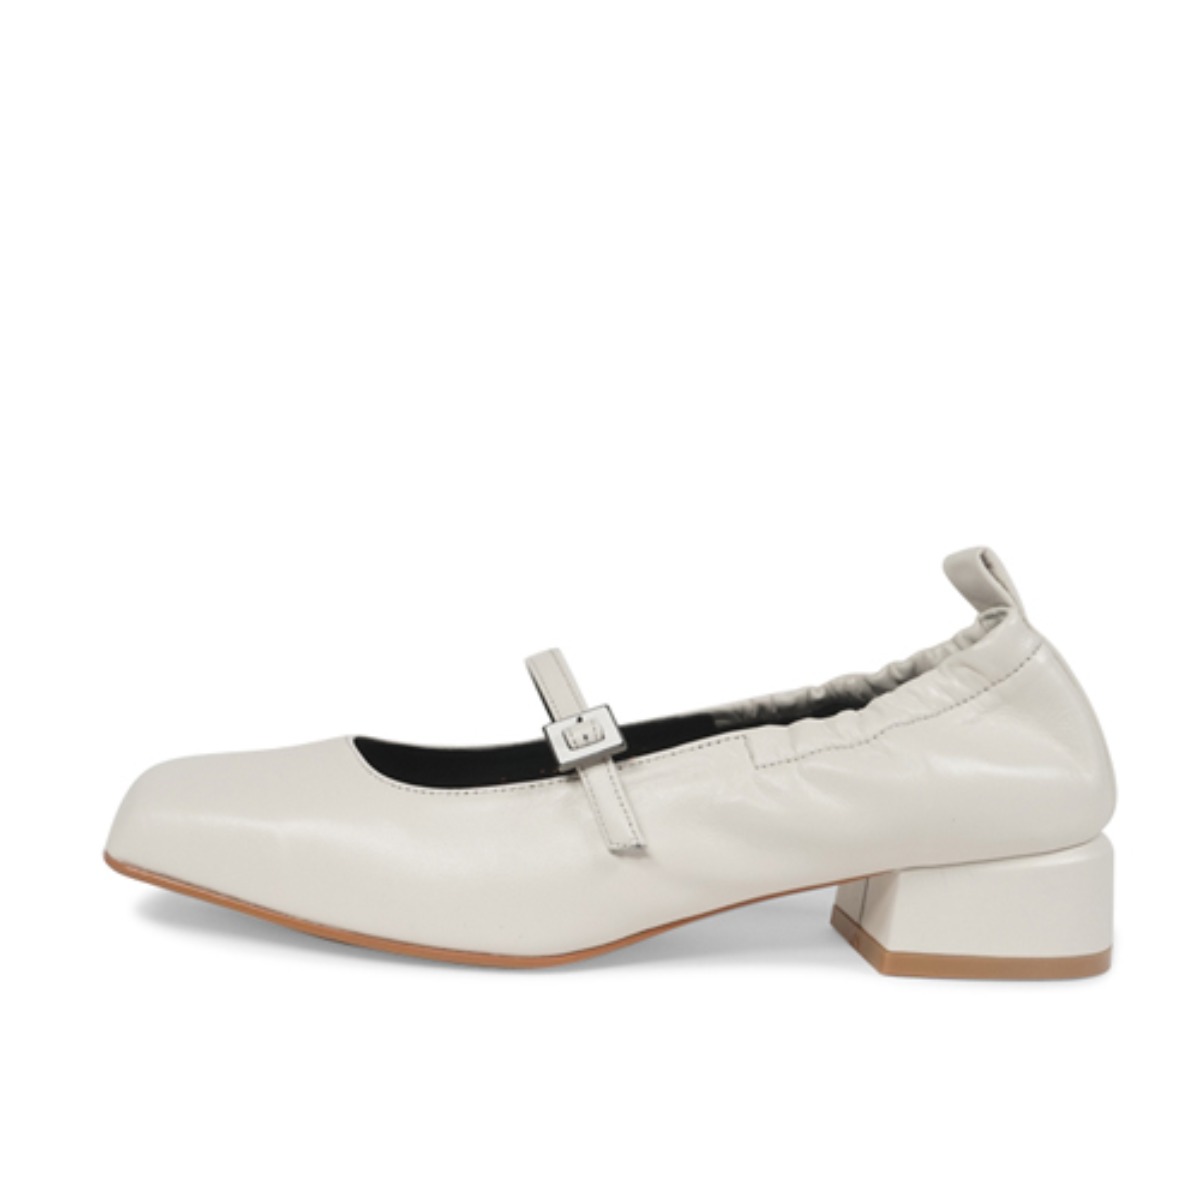 SPRING mary-jane loafers (Warm-White)